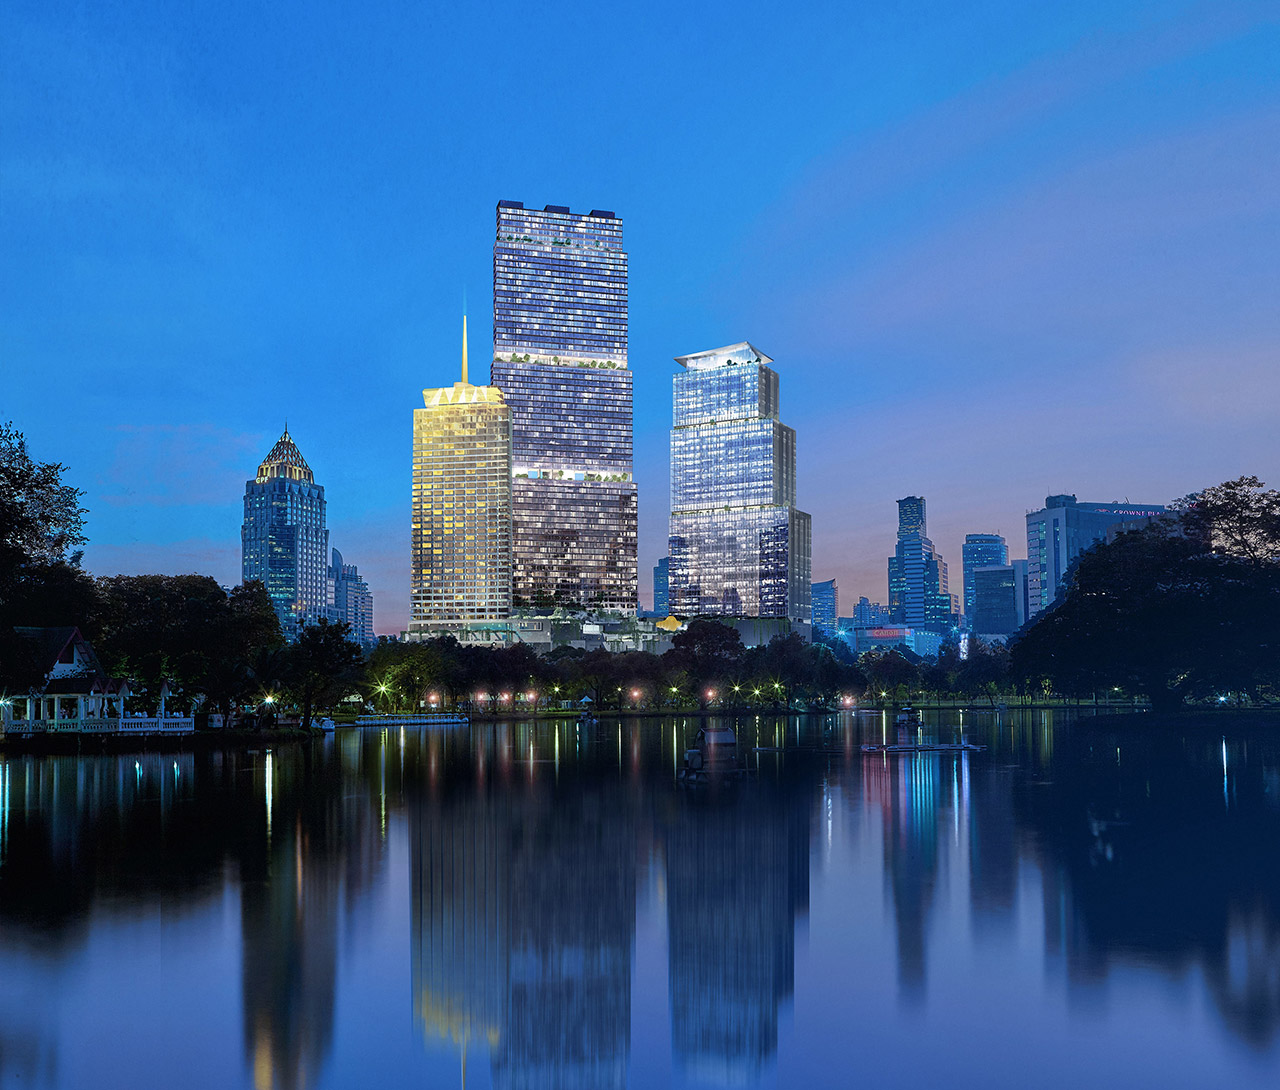 Dusit and CPN officially unveil ‘Dusit Central Park’ at the heart of Bangkok’s CBD